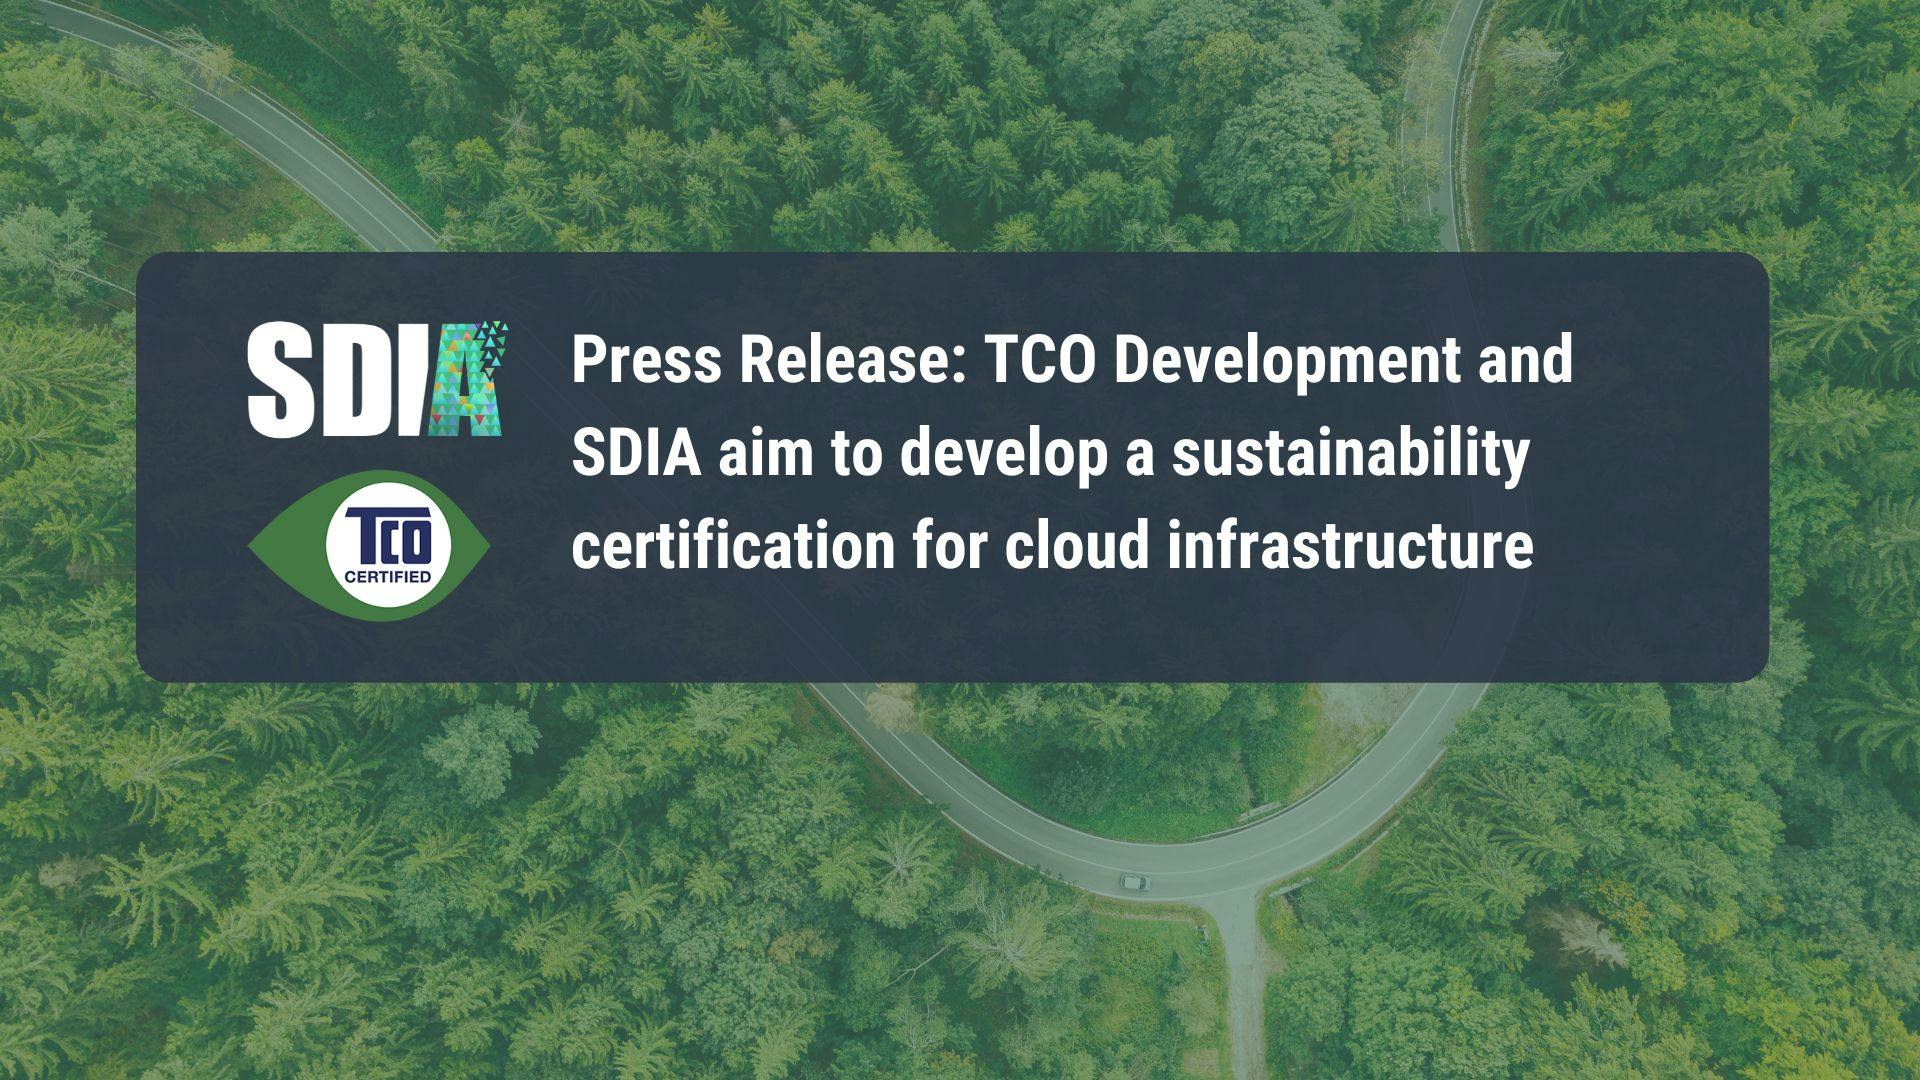 TCO Development and SDIA aim to develop a sustainability certification for cloud infrastructure